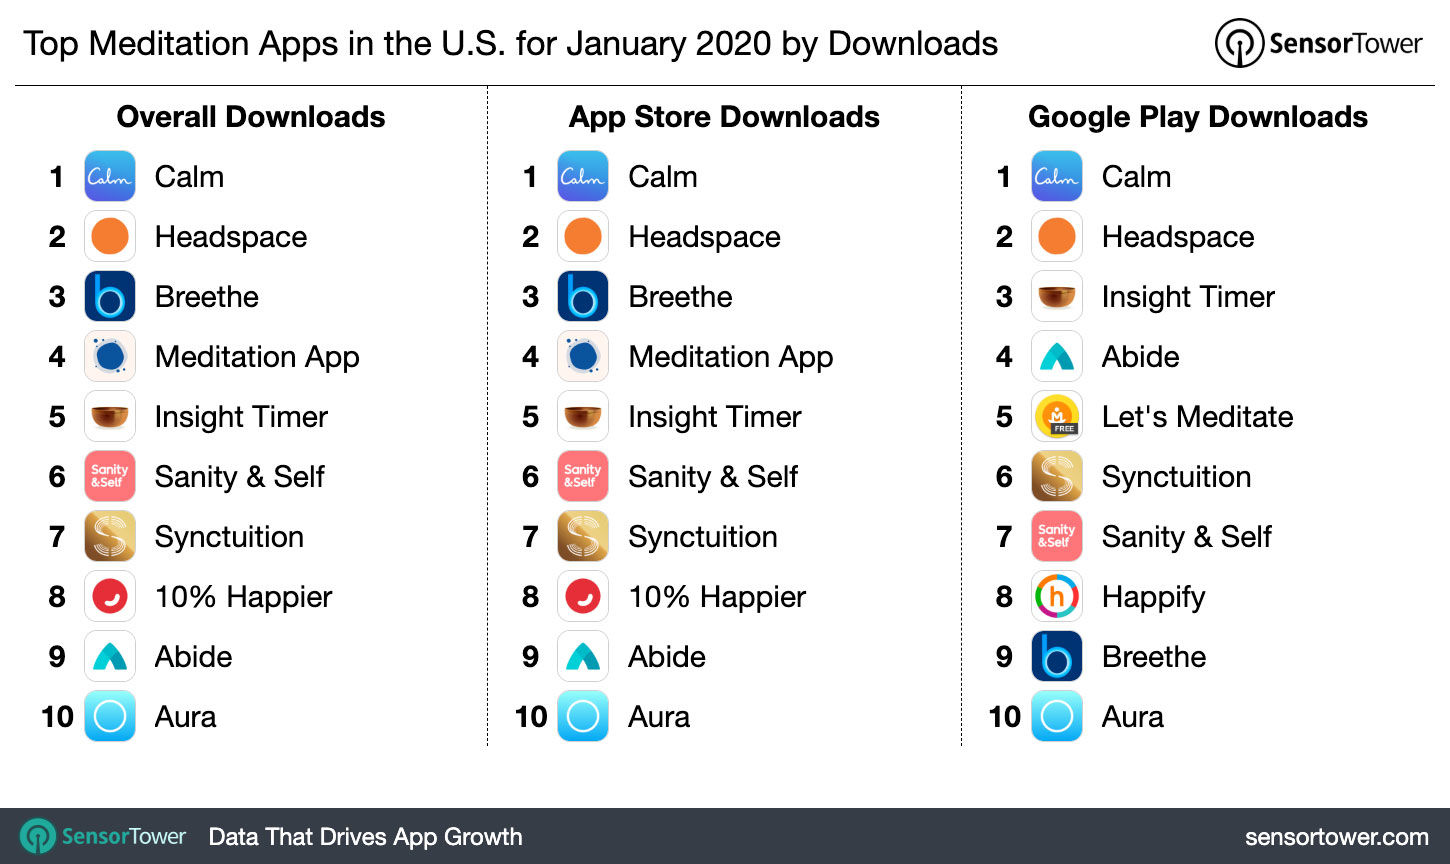 Top Meditation Apps in the U.S. for January 2020 by Downloads